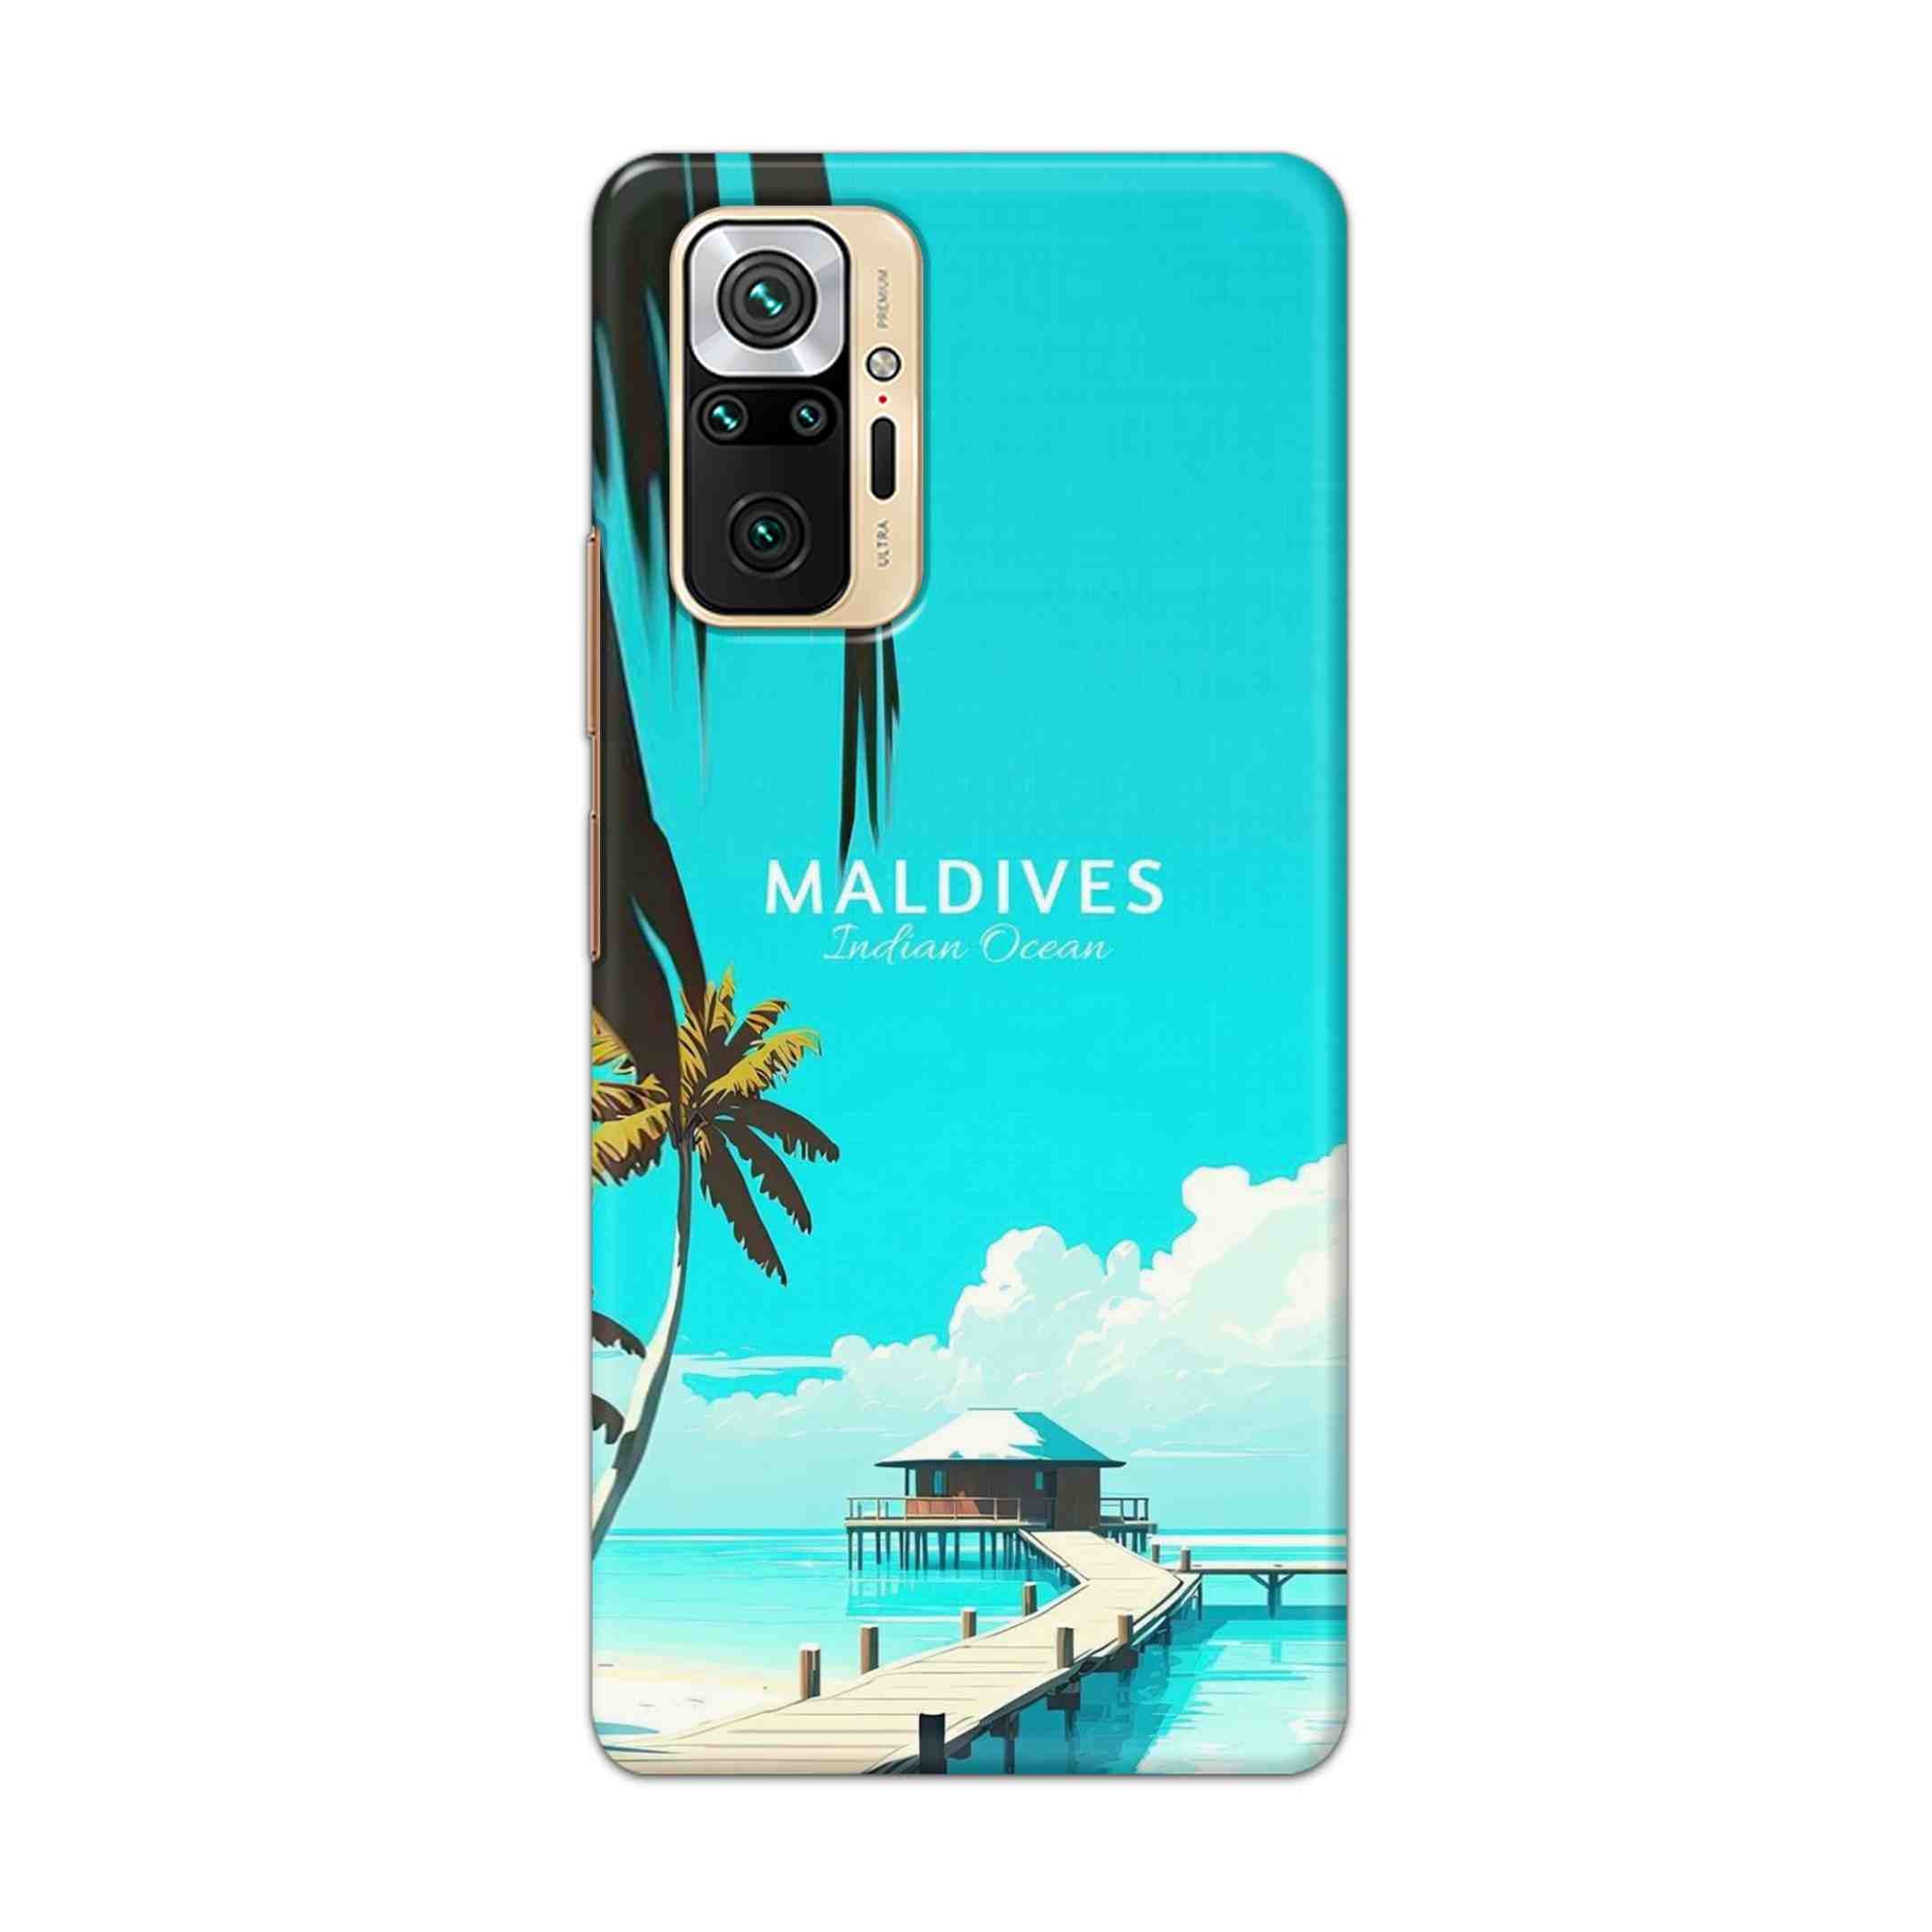 Buy Maldives Hard Back Mobile Phone Case Cover For Redmi Note 10 Pro Online